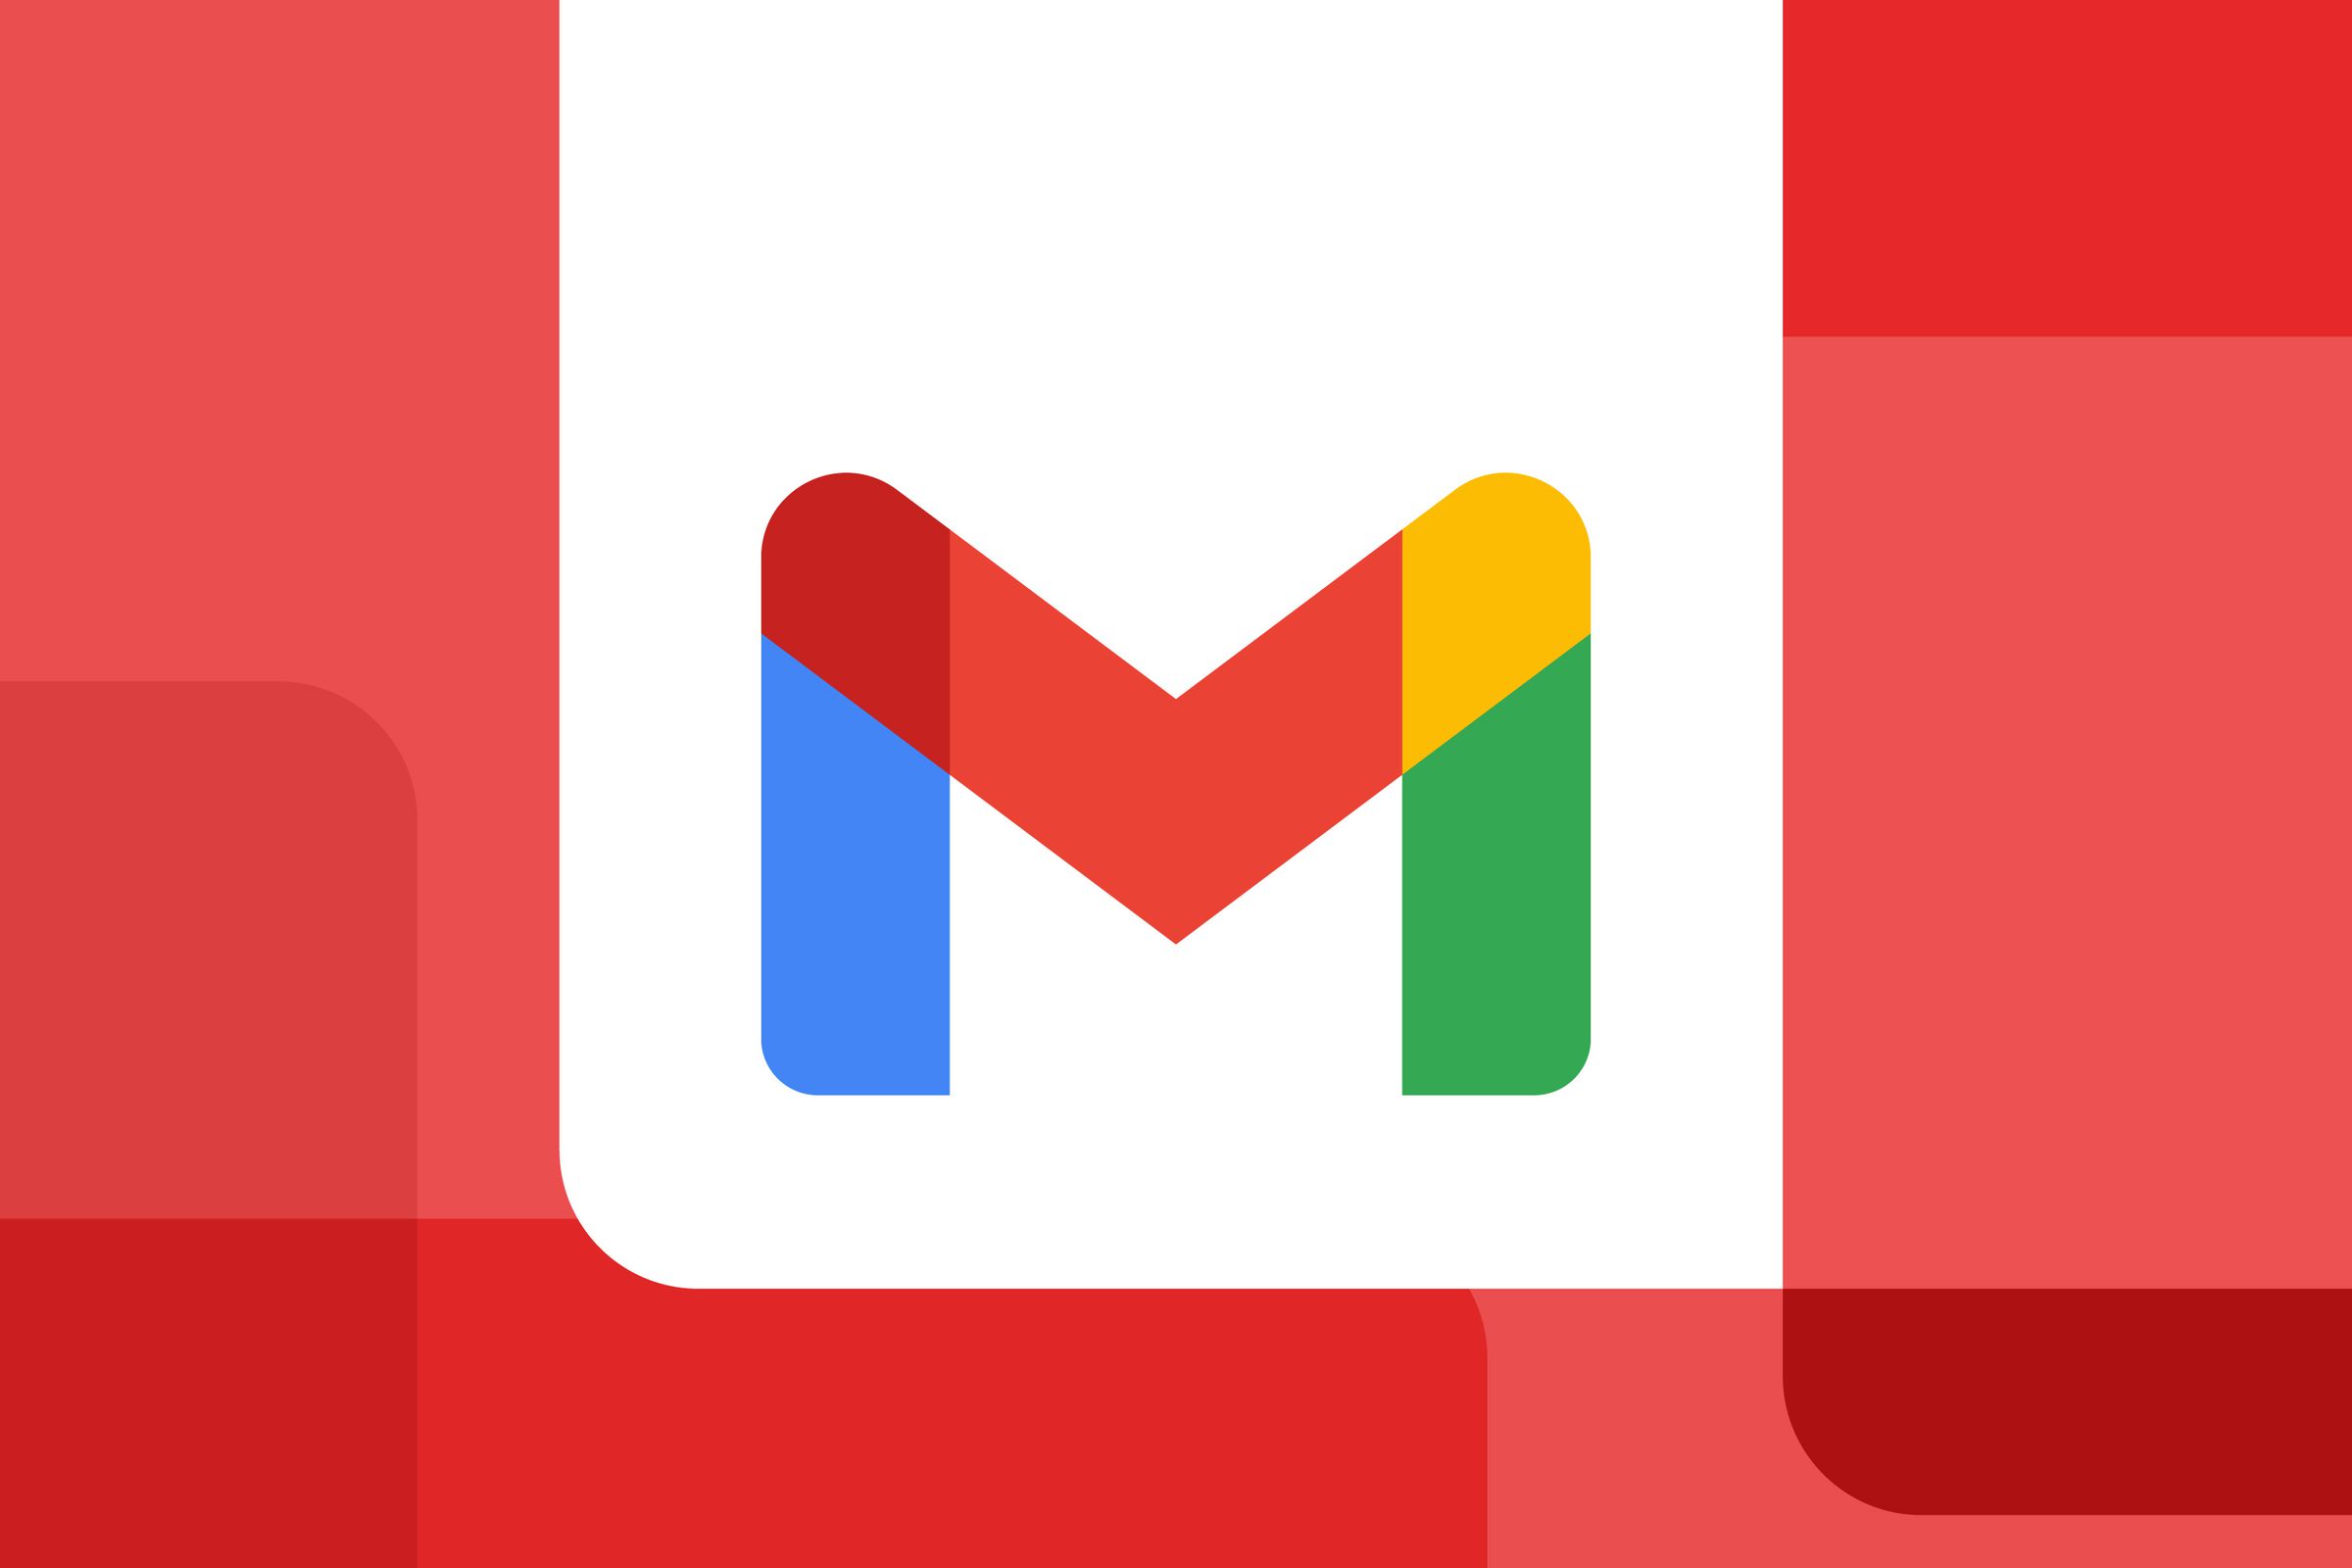 Searching Gmail on your phone is (hopefully) about to get way better